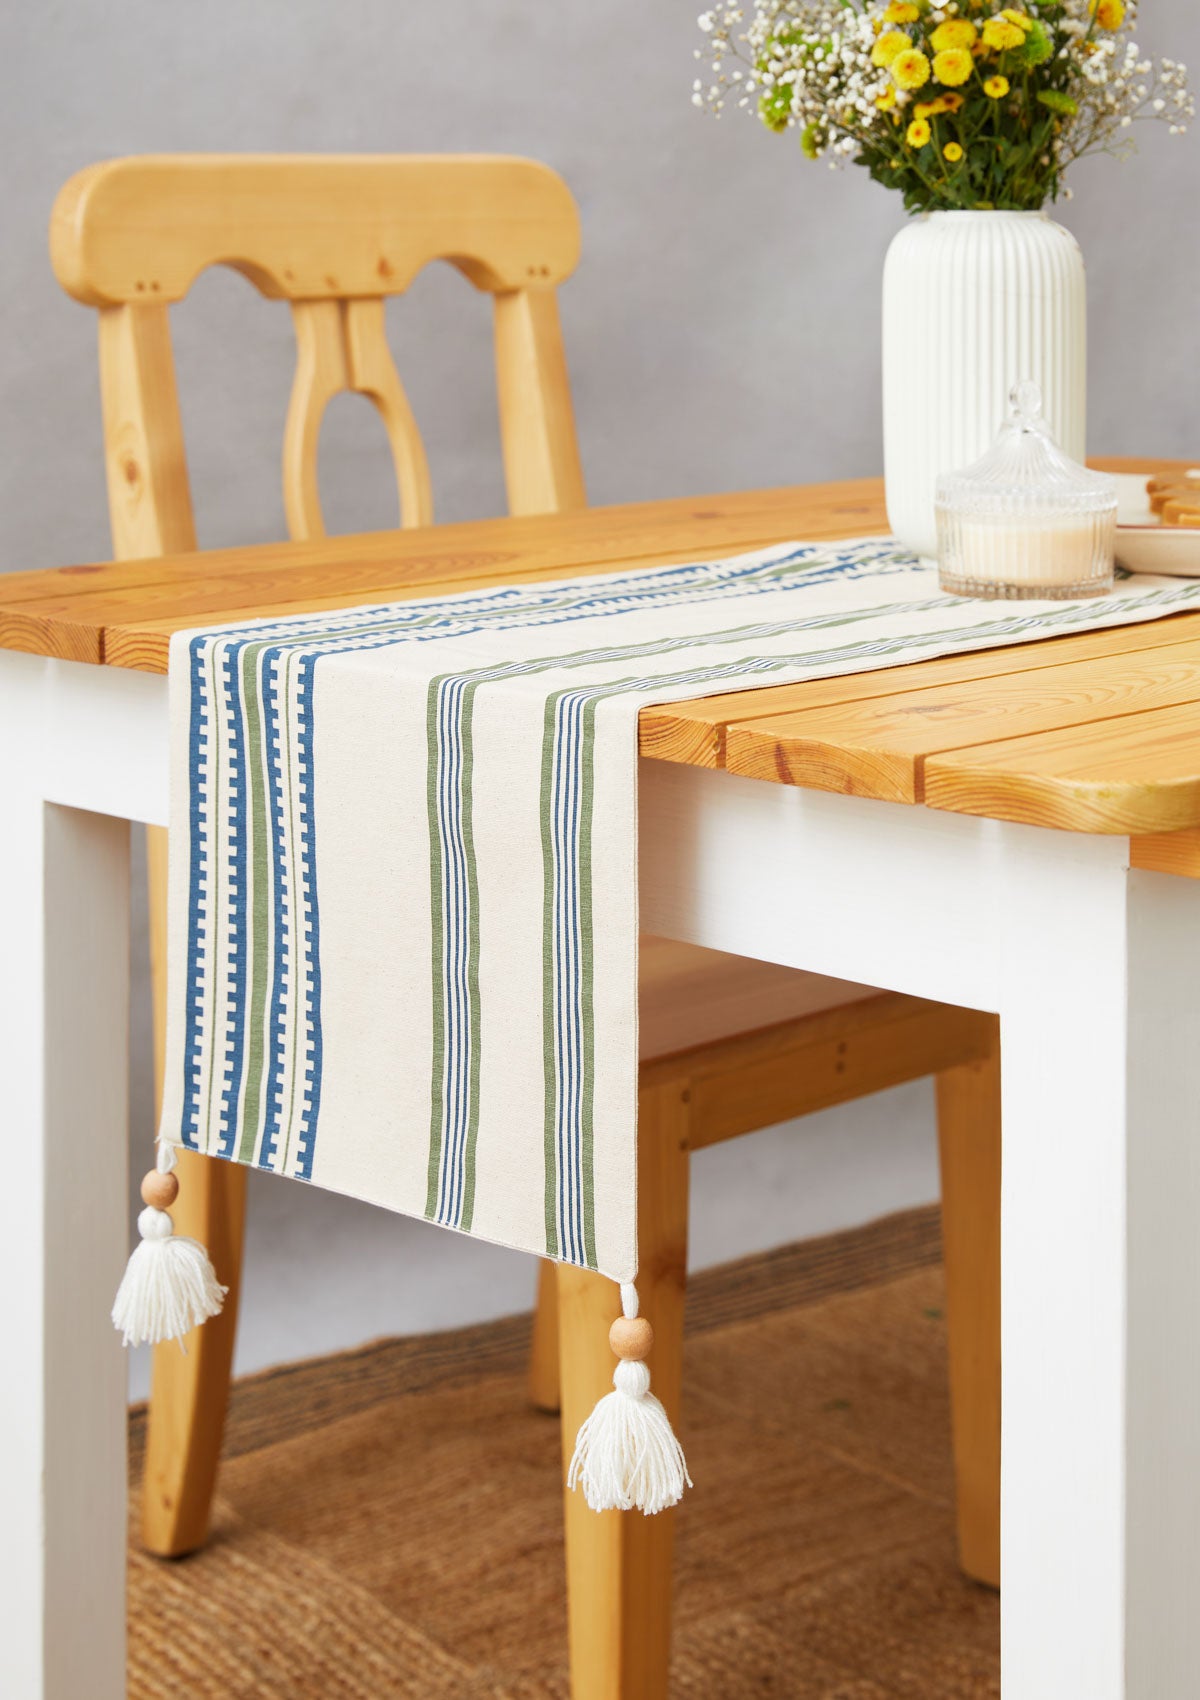 Roman Stripes 100% cotton geometric table runner for 4 seater or 6 seater dining - Green